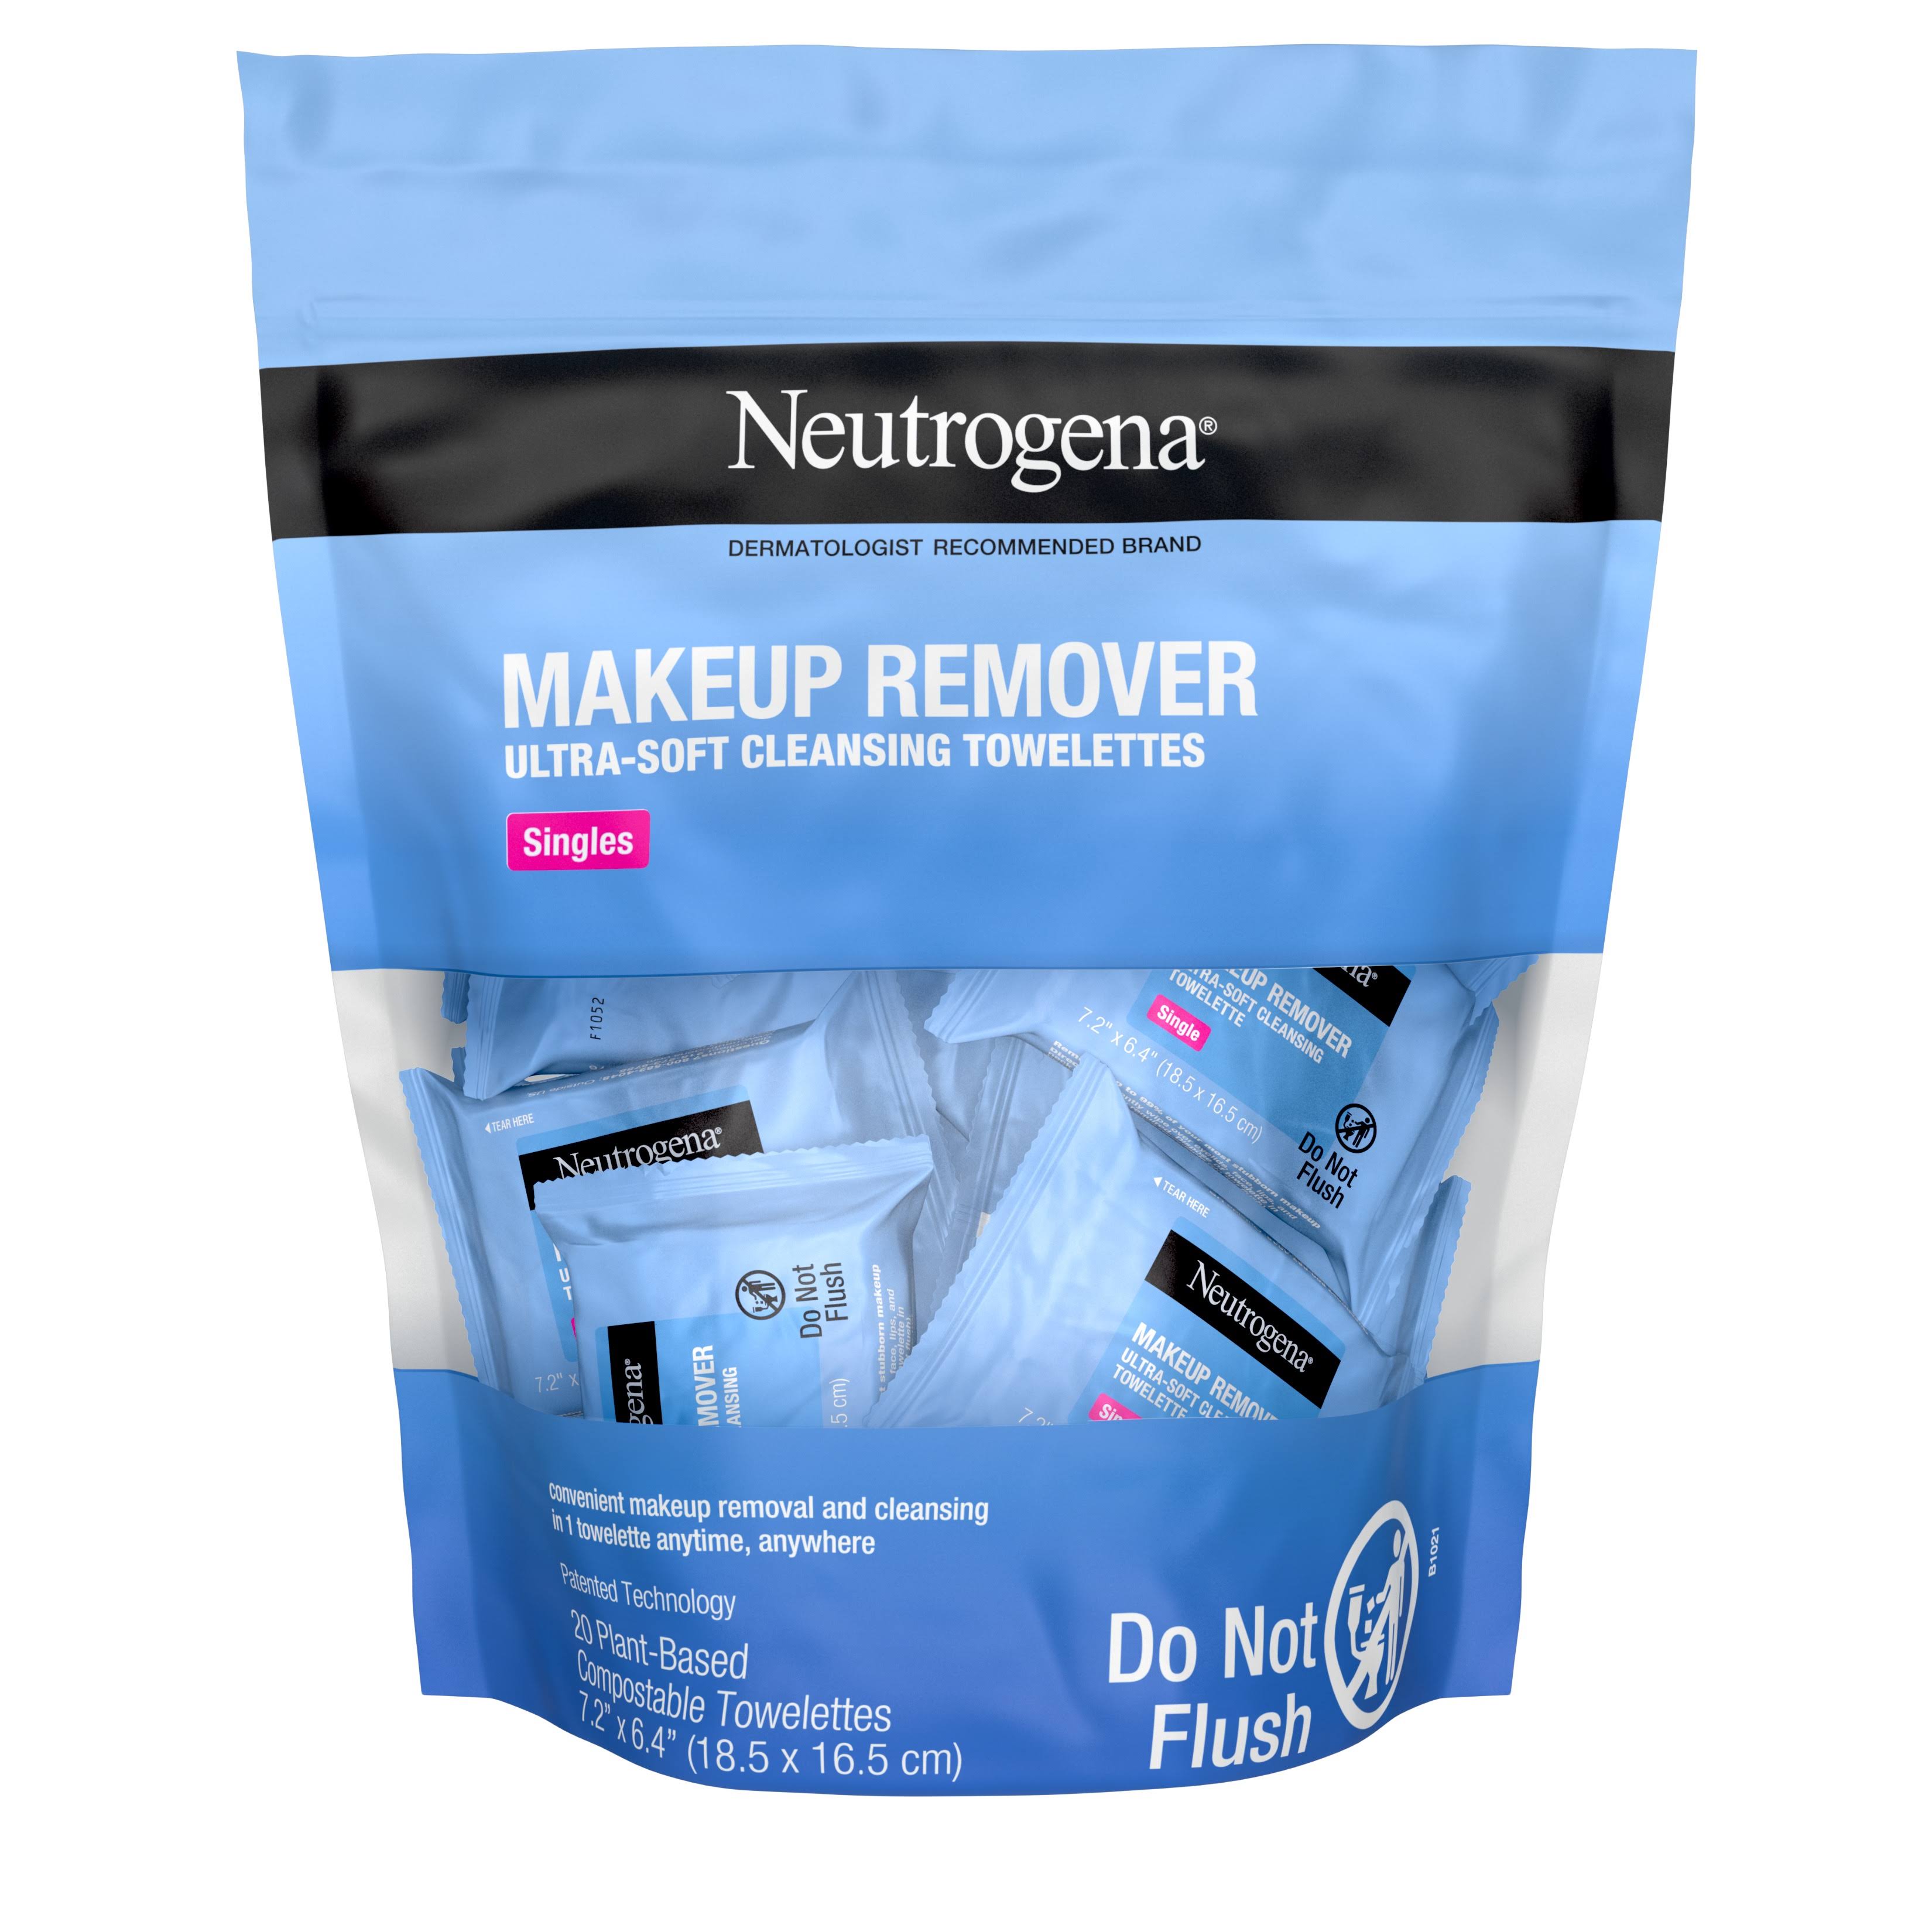 Neutrogena Makeup Remover Cleansing Towelettes Singles 20 Ct